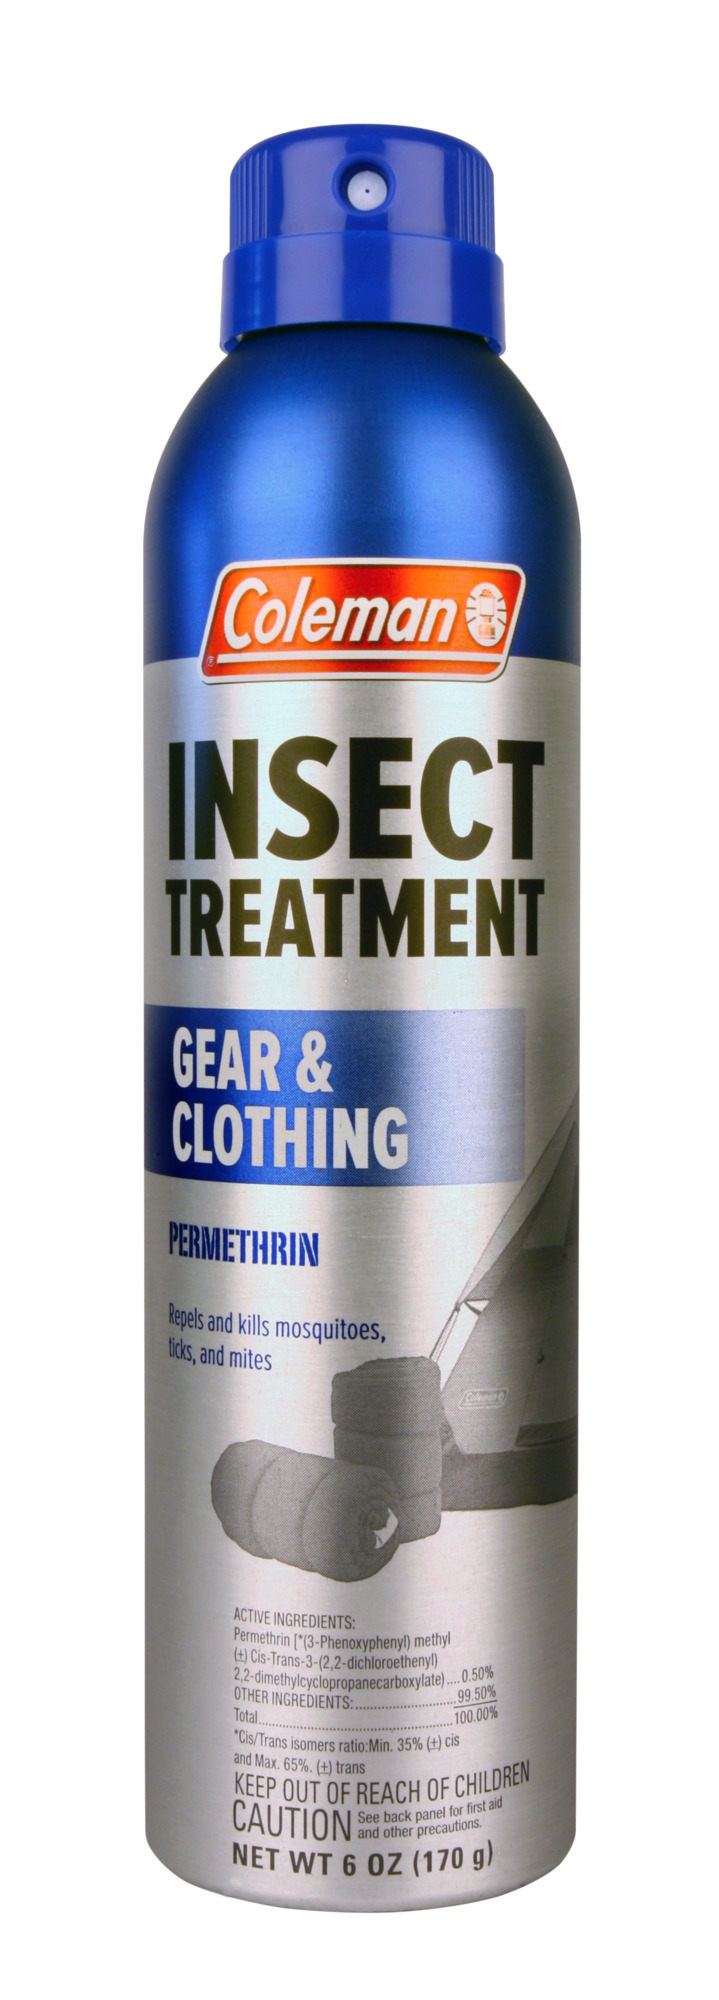 Coleman 752 Gear & Clothing Insect Repellent, Tick and Mosquito, 6oz